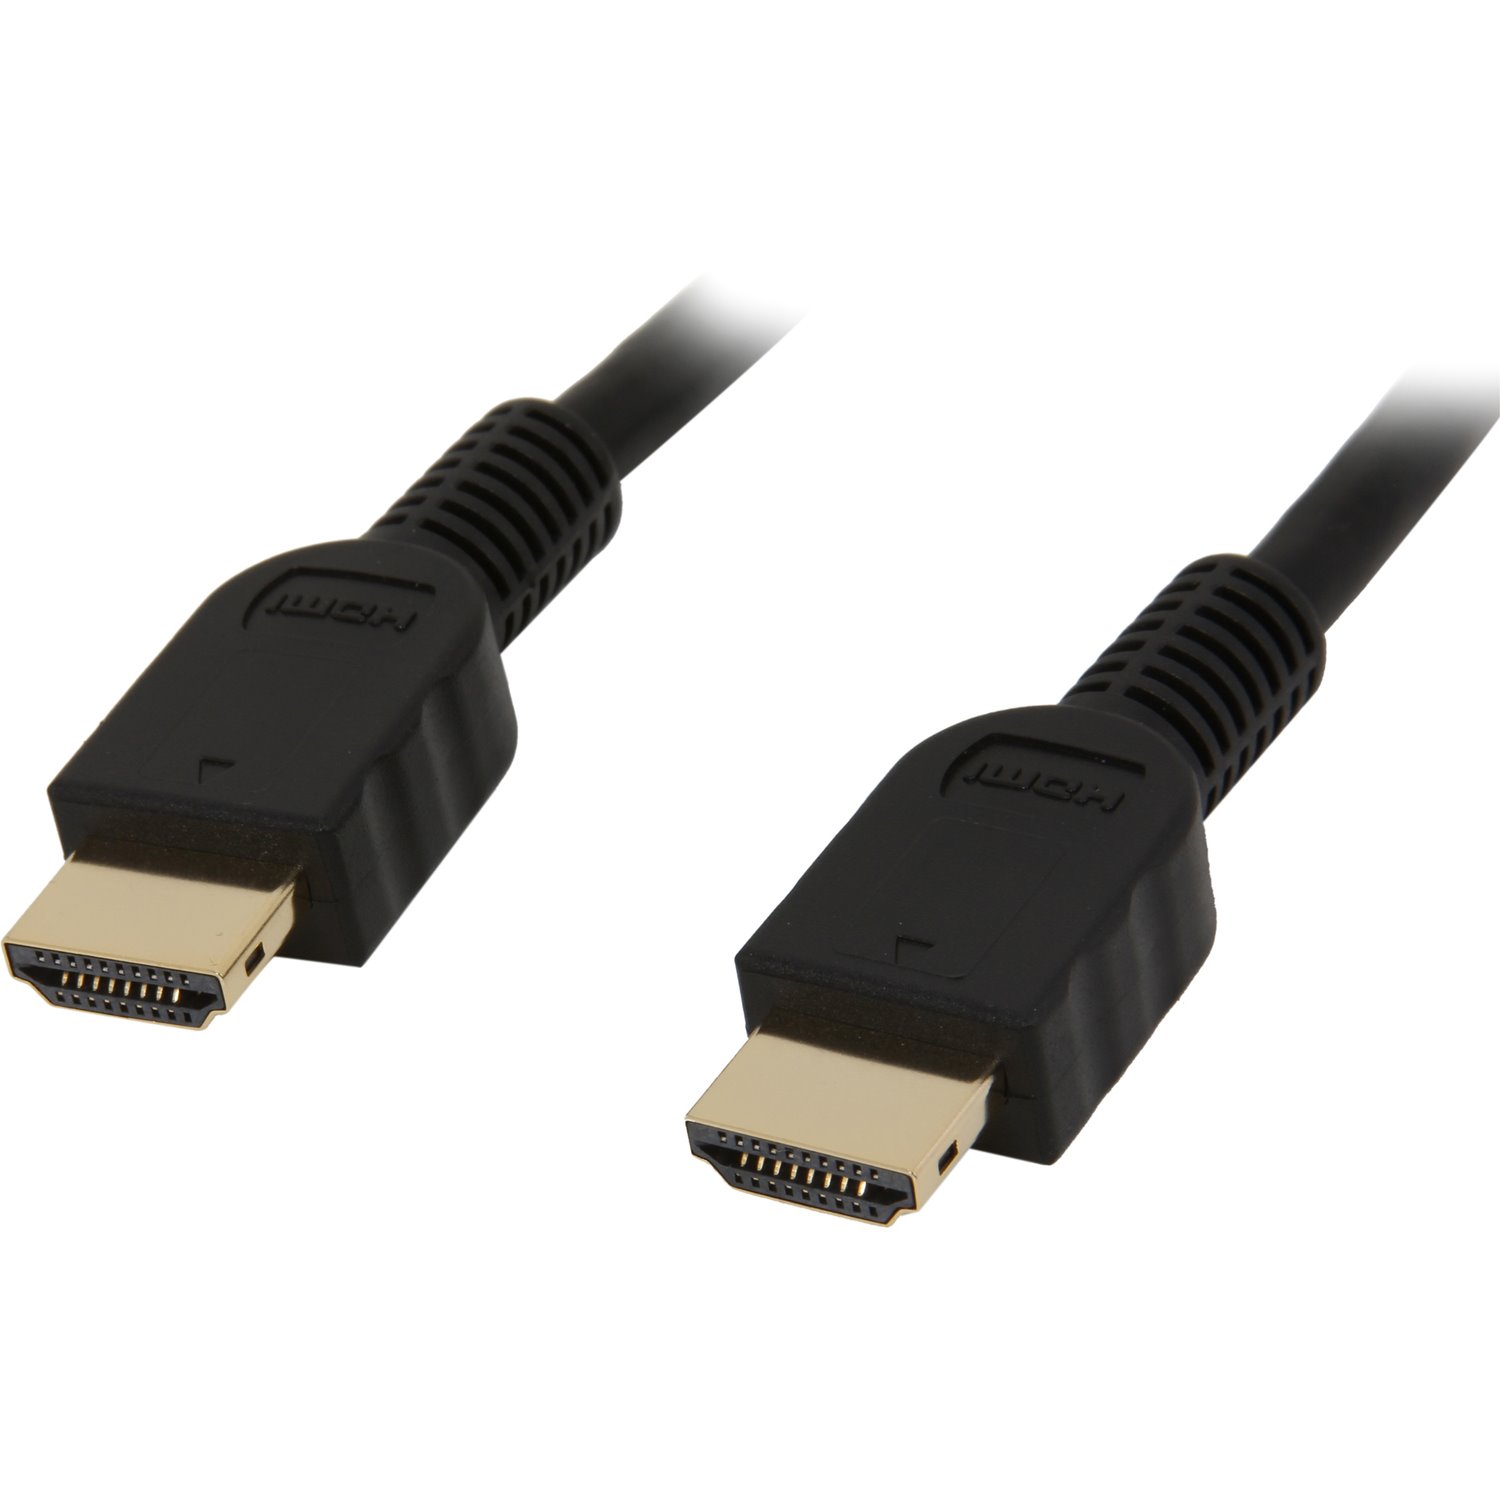 Rosewill Pellucid HD Series High Speed HDMI Cable (6 Feet)